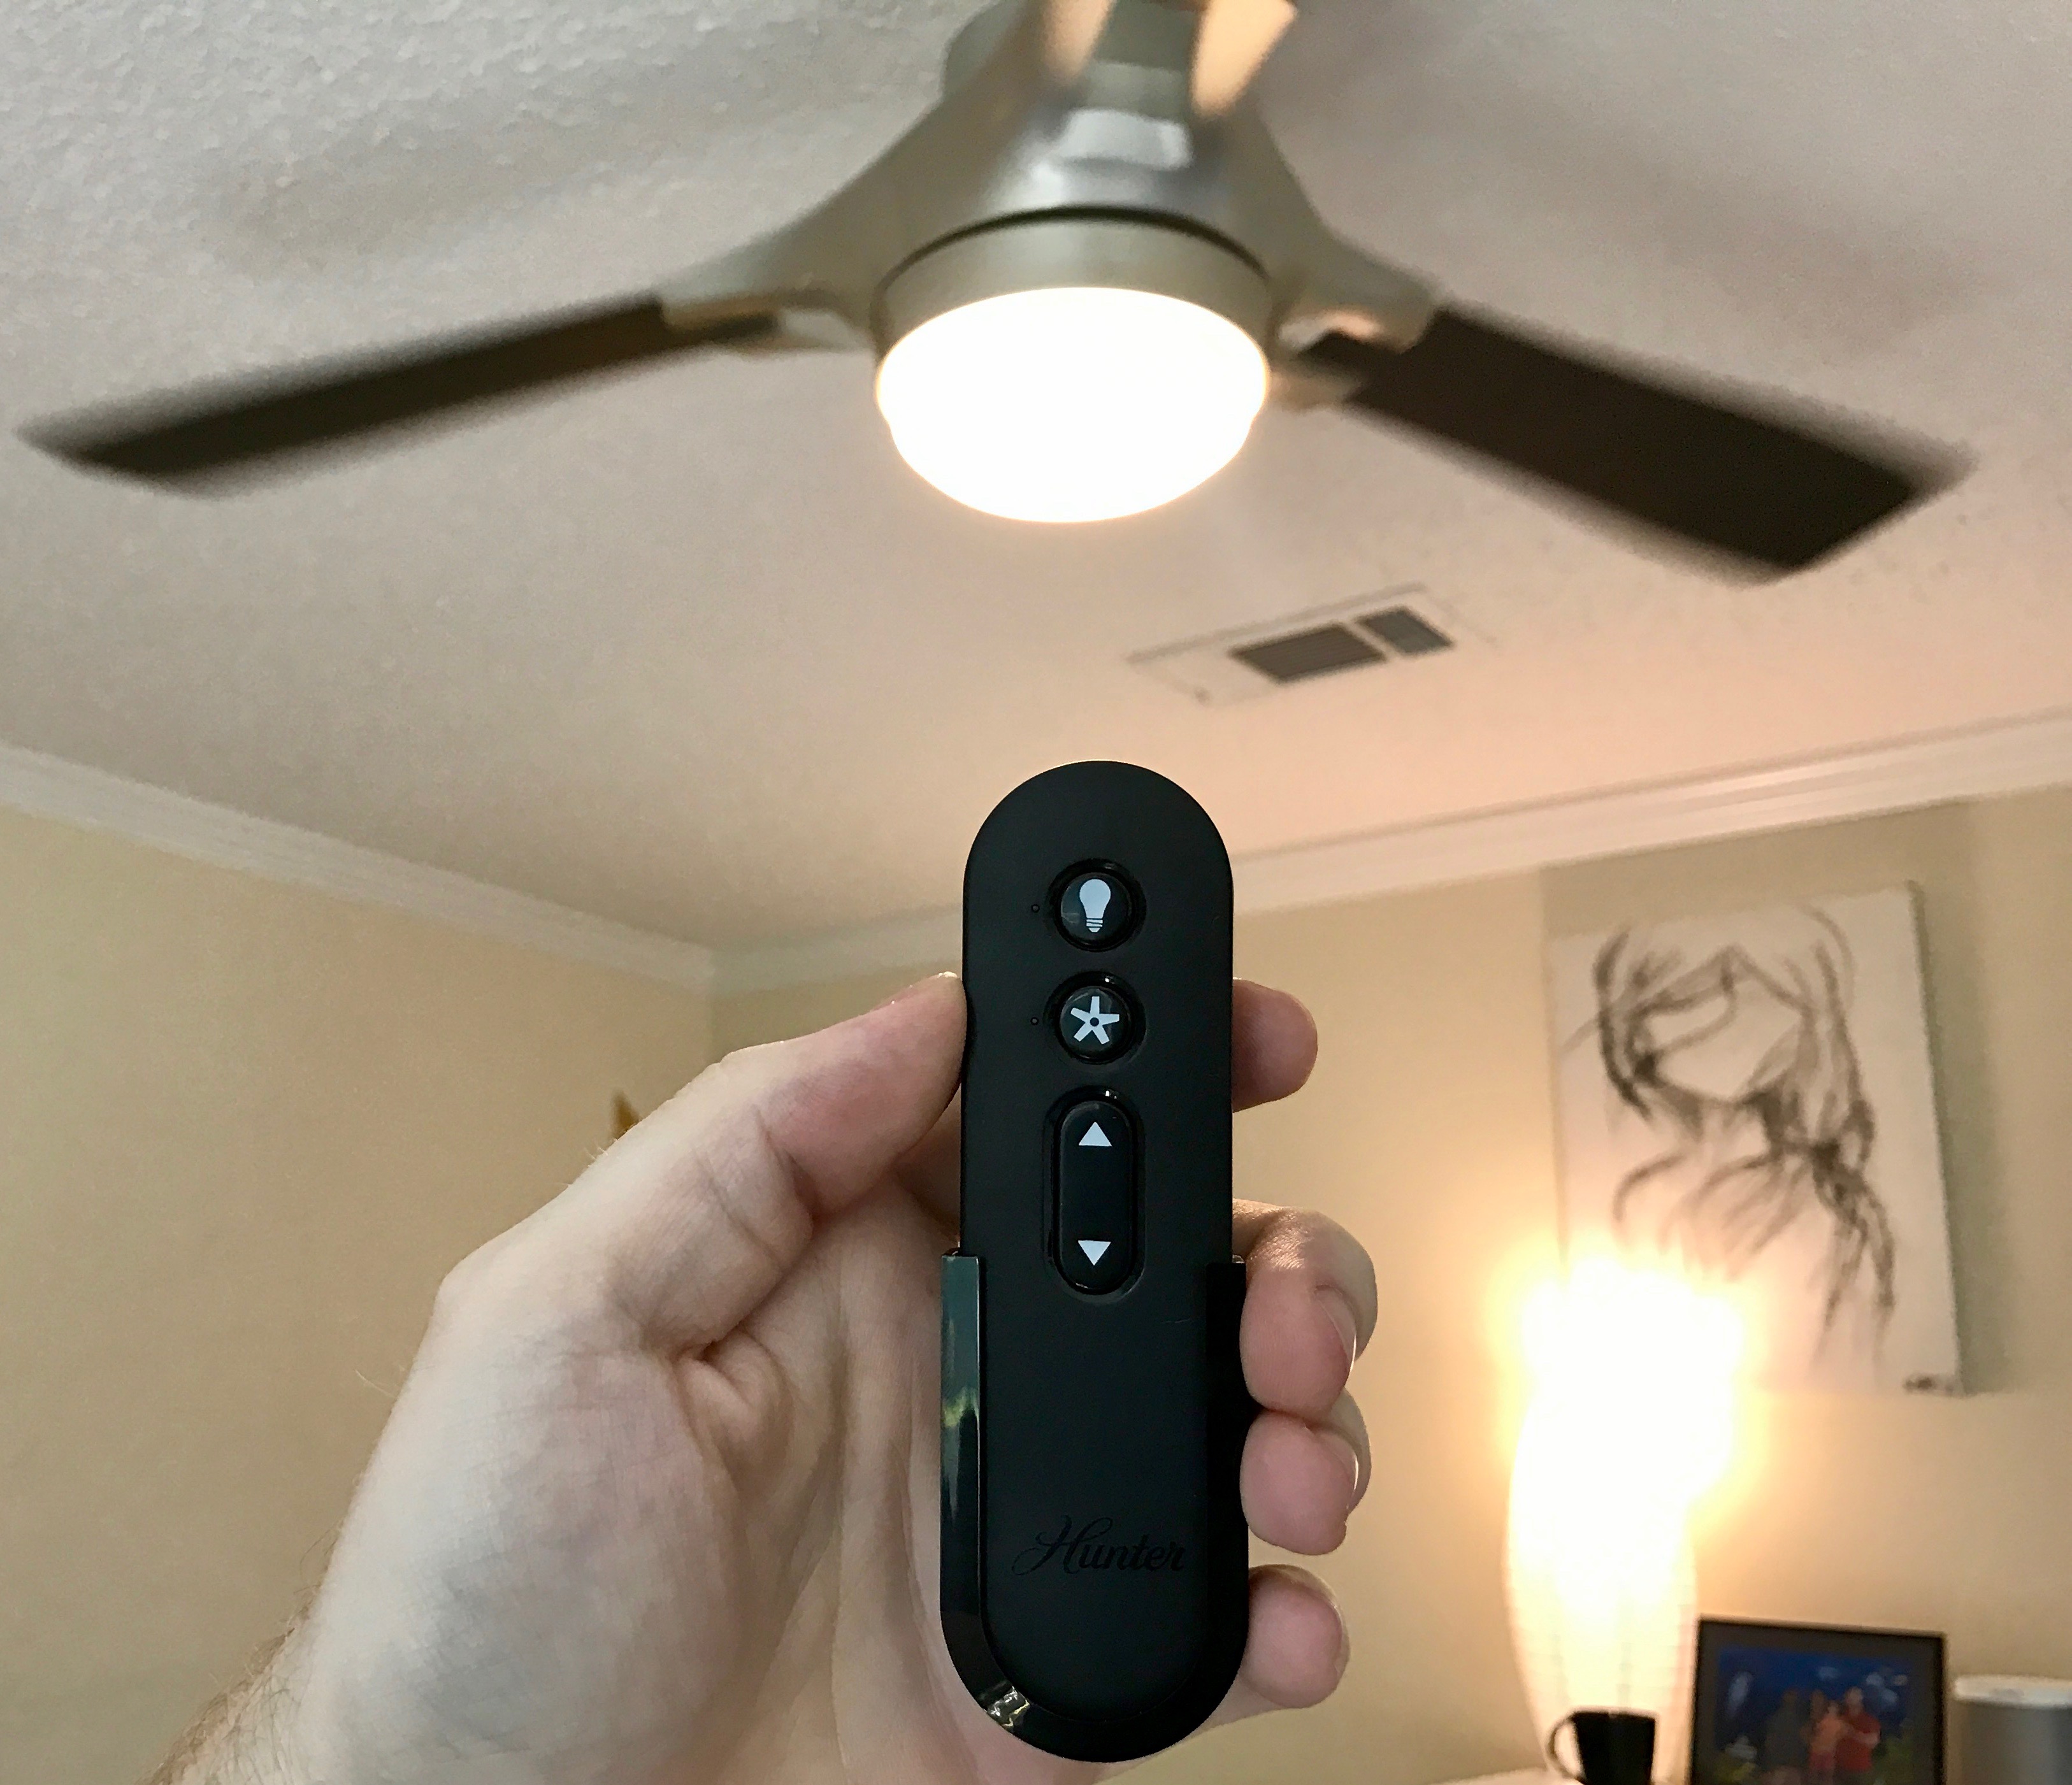 Hunter Simpleconnect Ceiling Fan, Can I Make My Ceiling Fan Remote Controlled